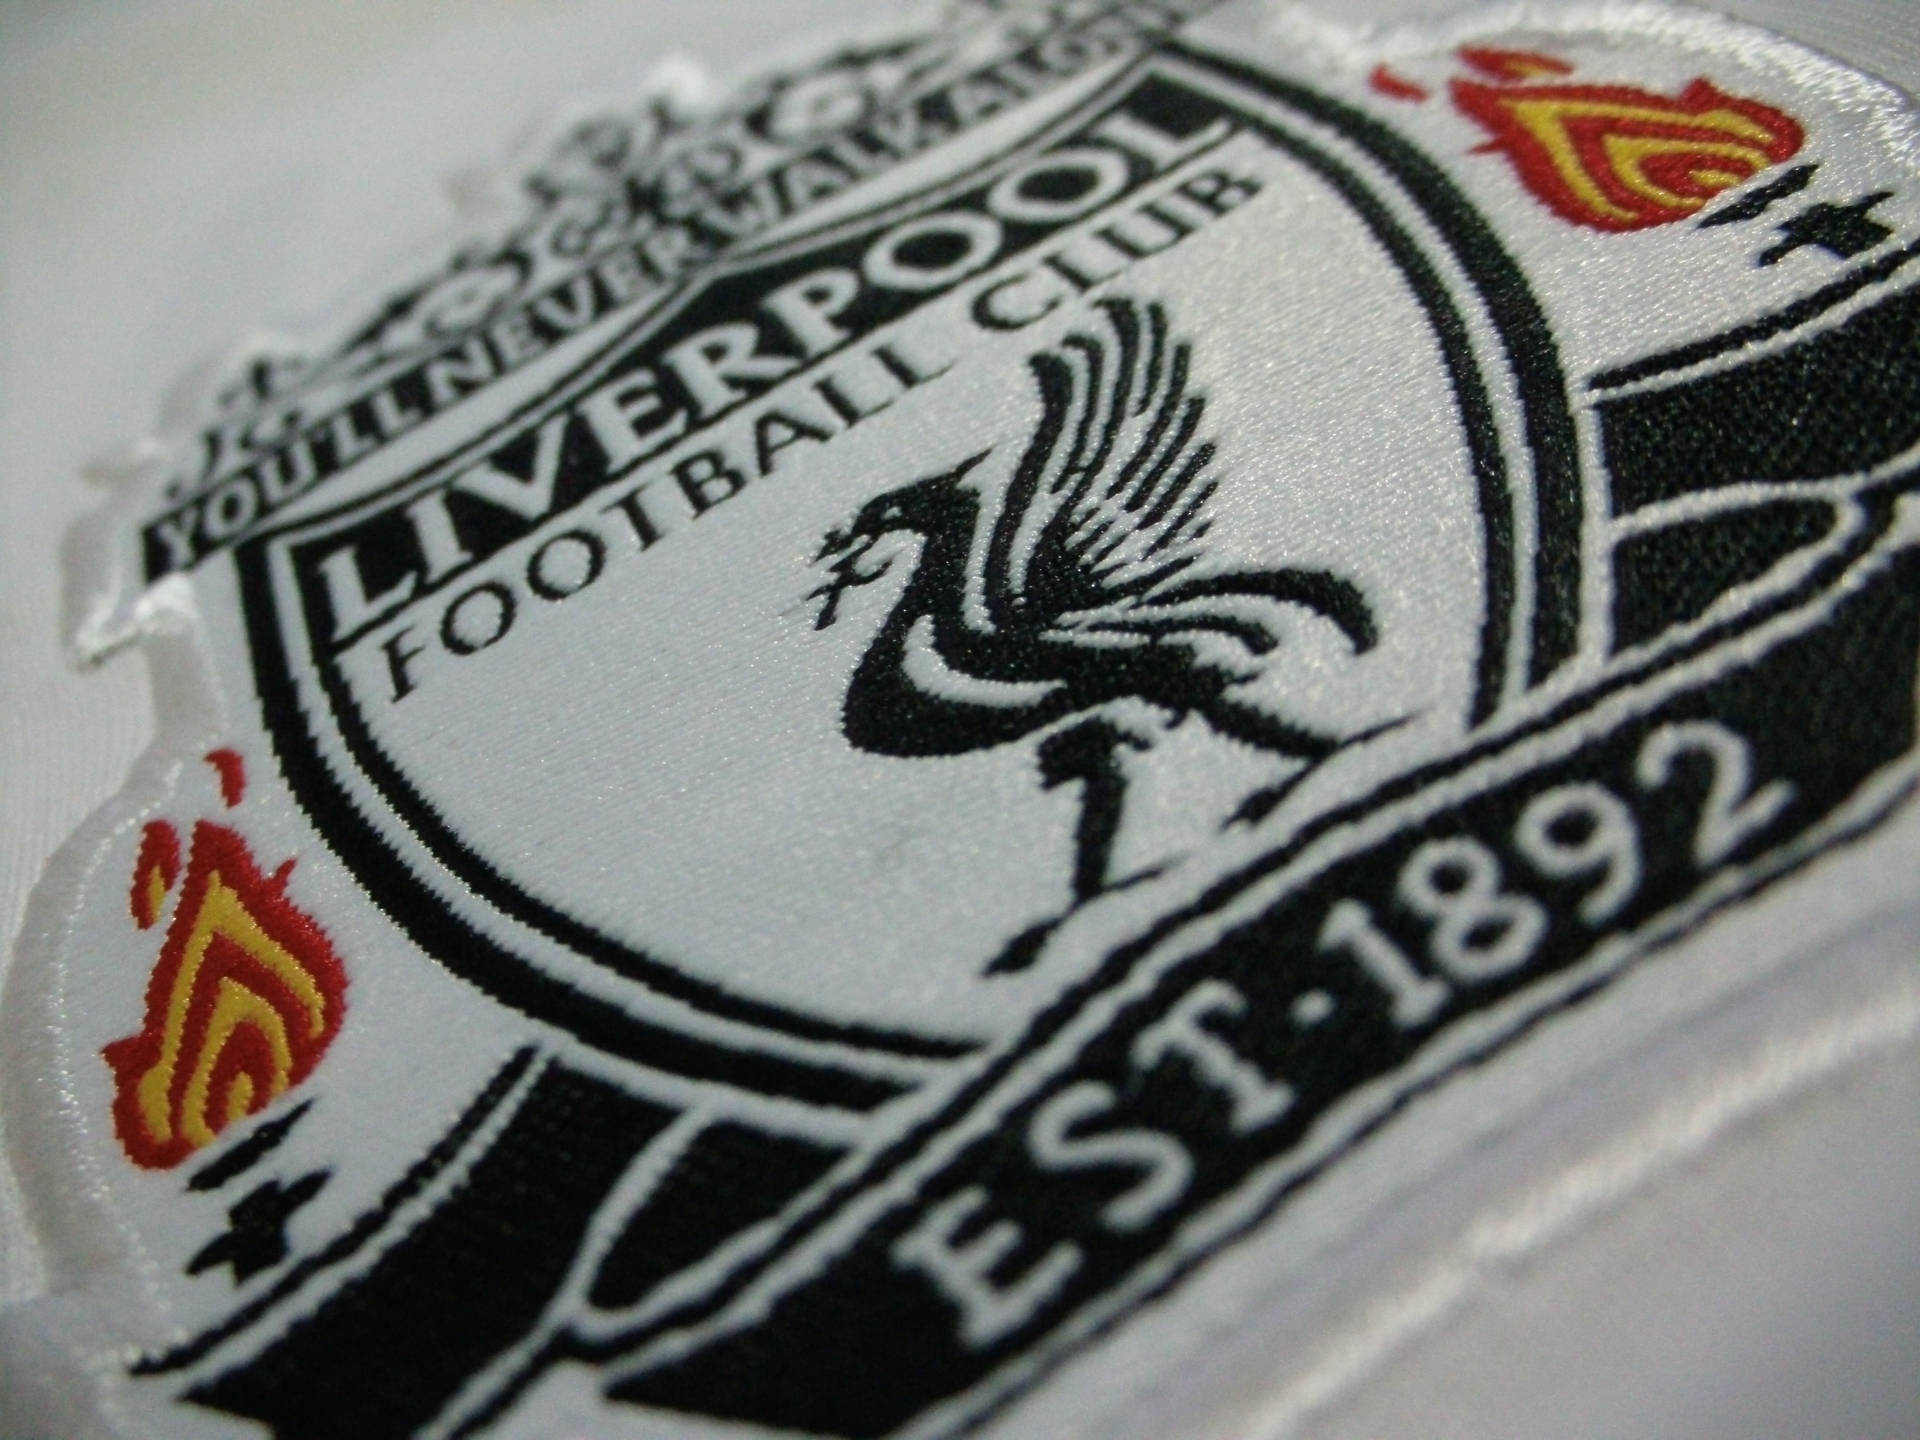 Liverpool Fc Patch Background